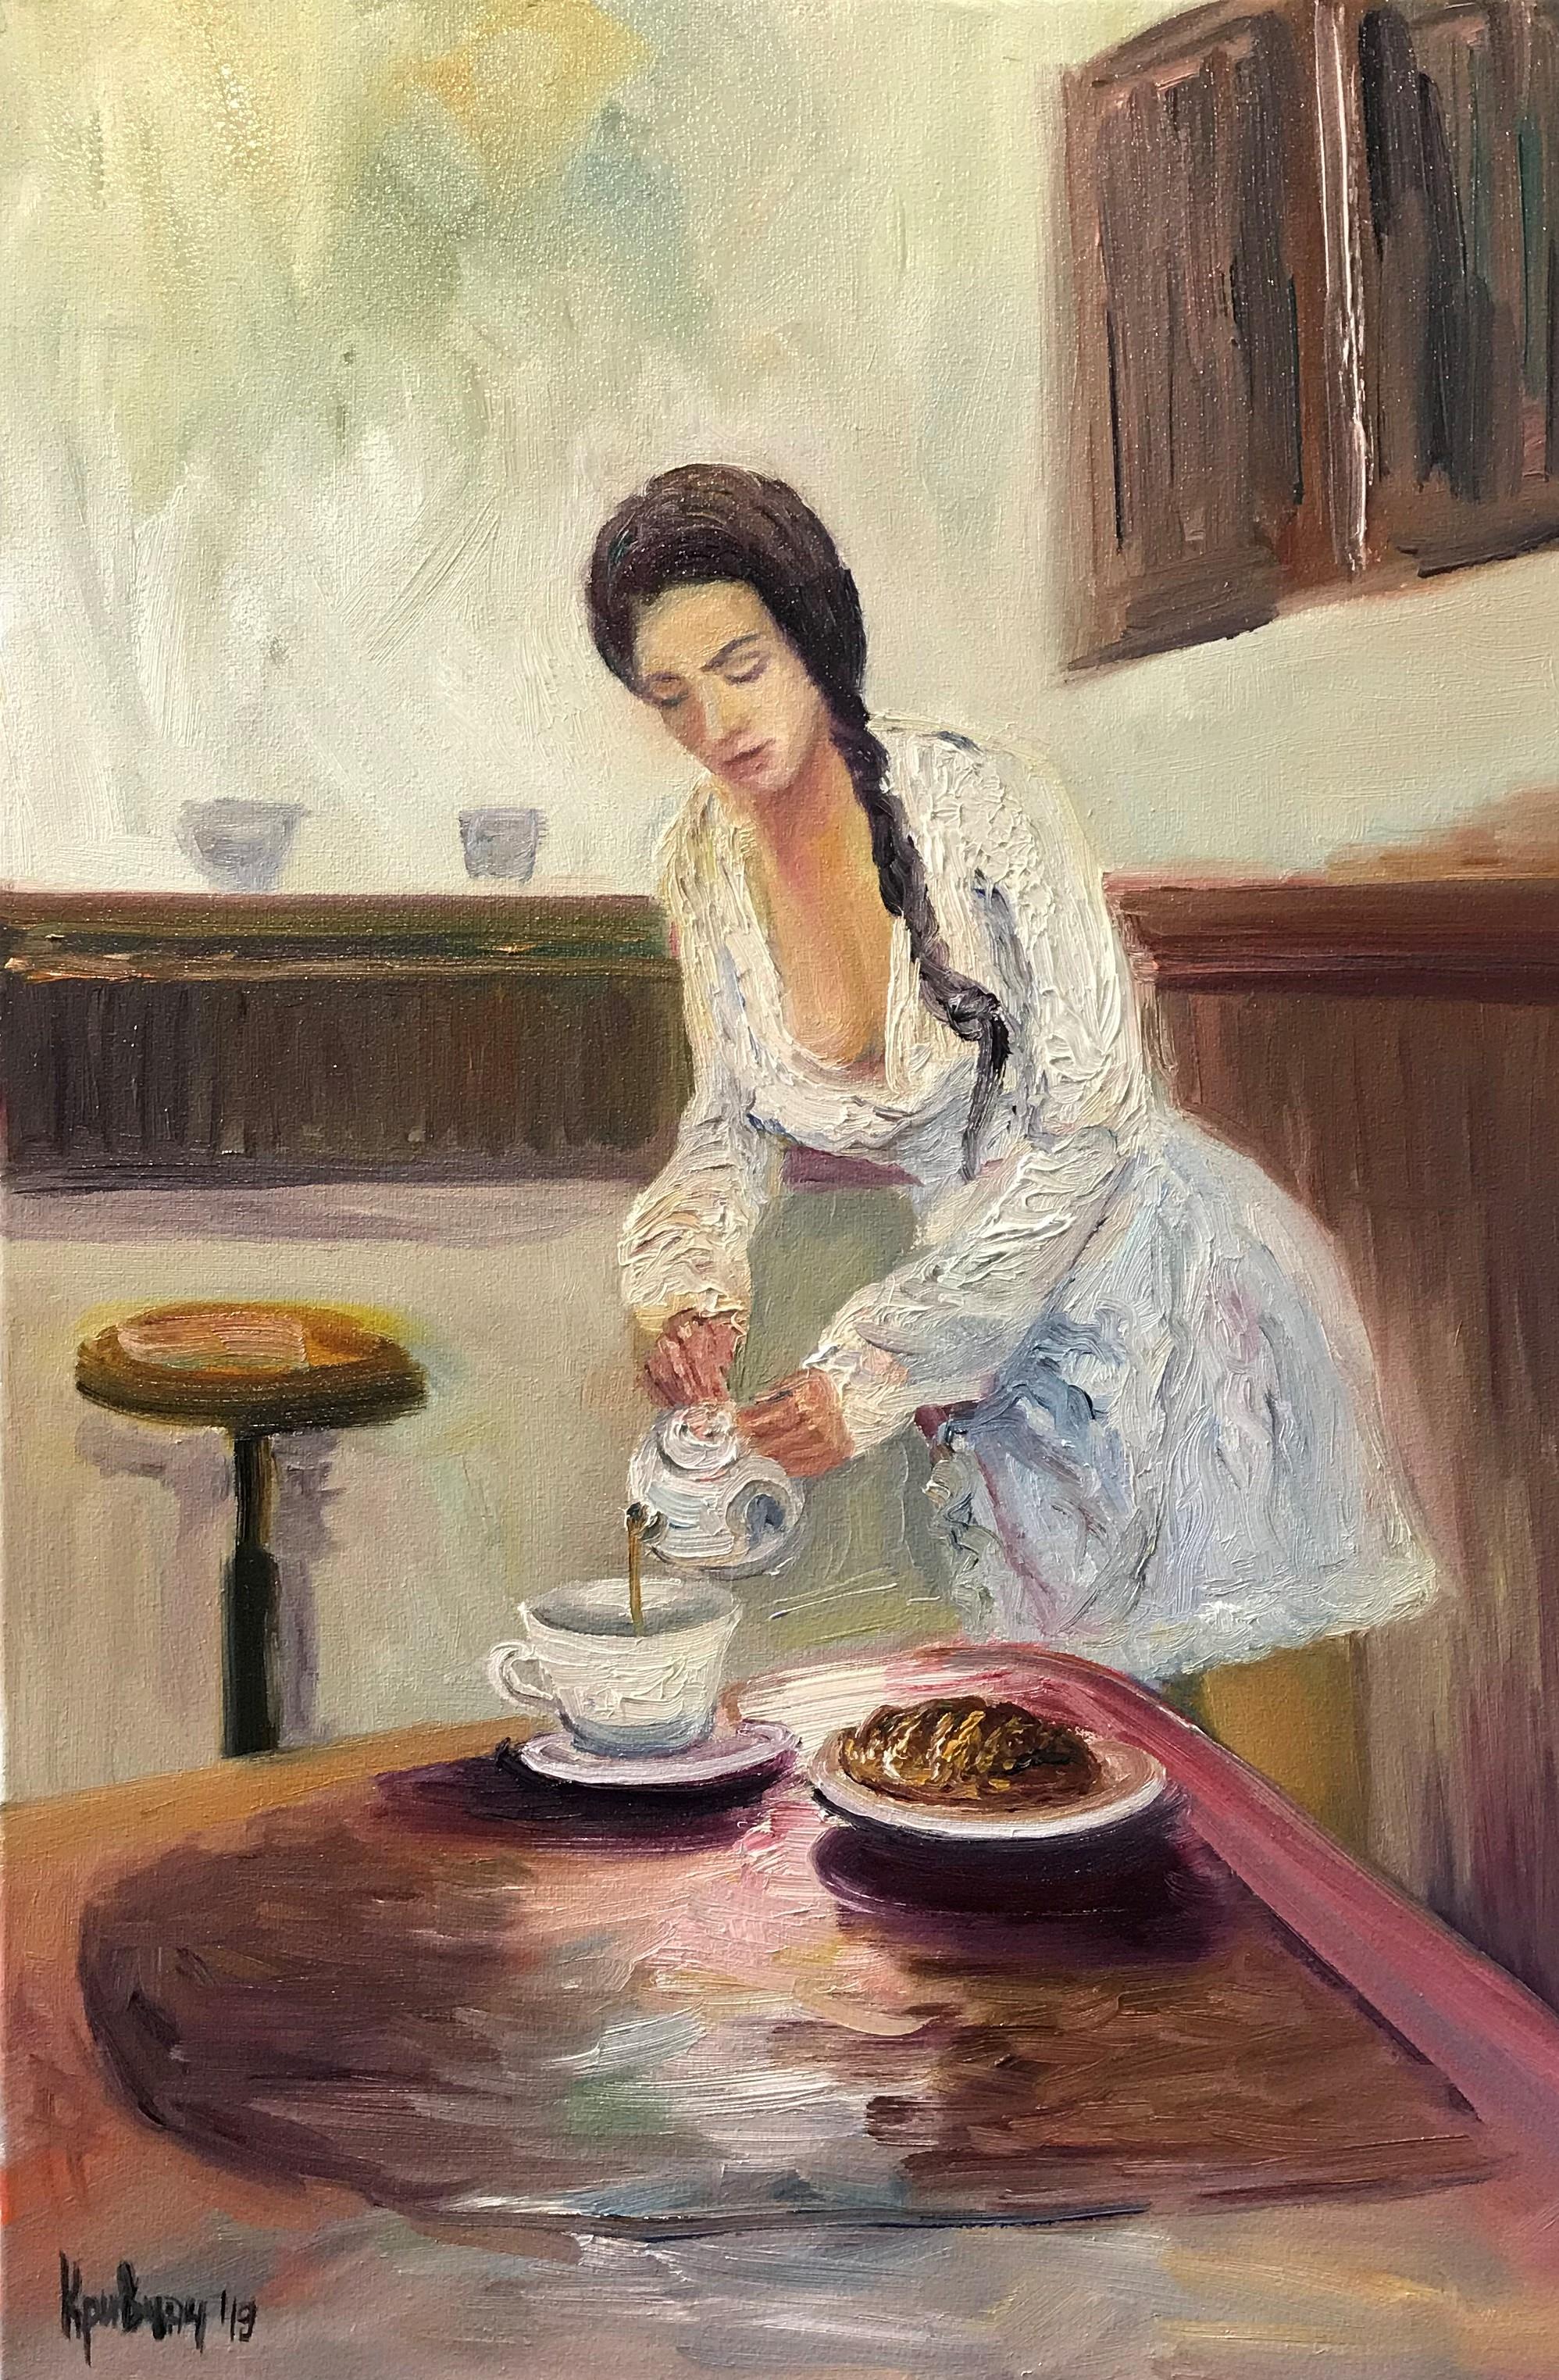  Kateryna Krivchach Figurative Painting - Girl with a coffee pot